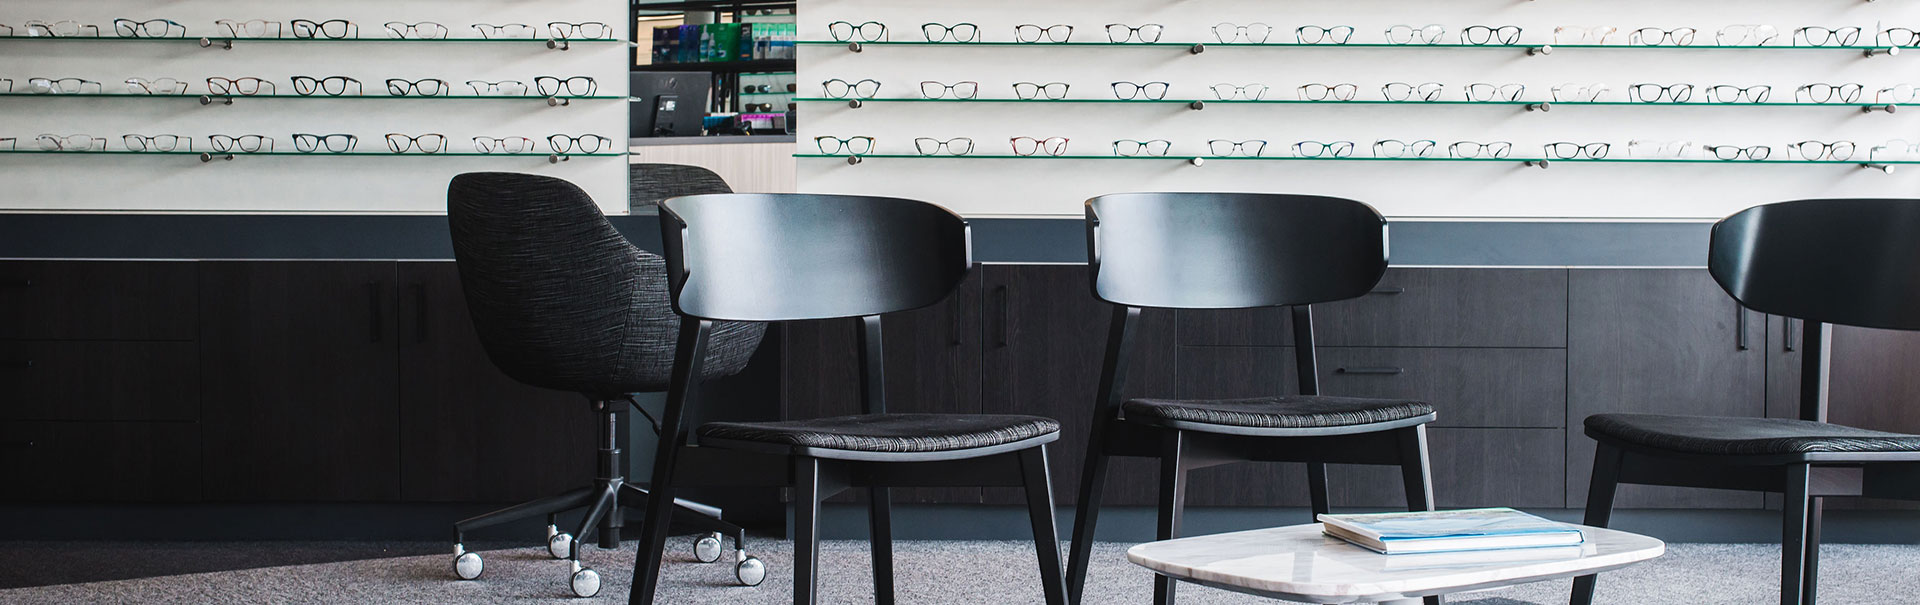 Sitting area with wall shelves of eyeglasses in the background